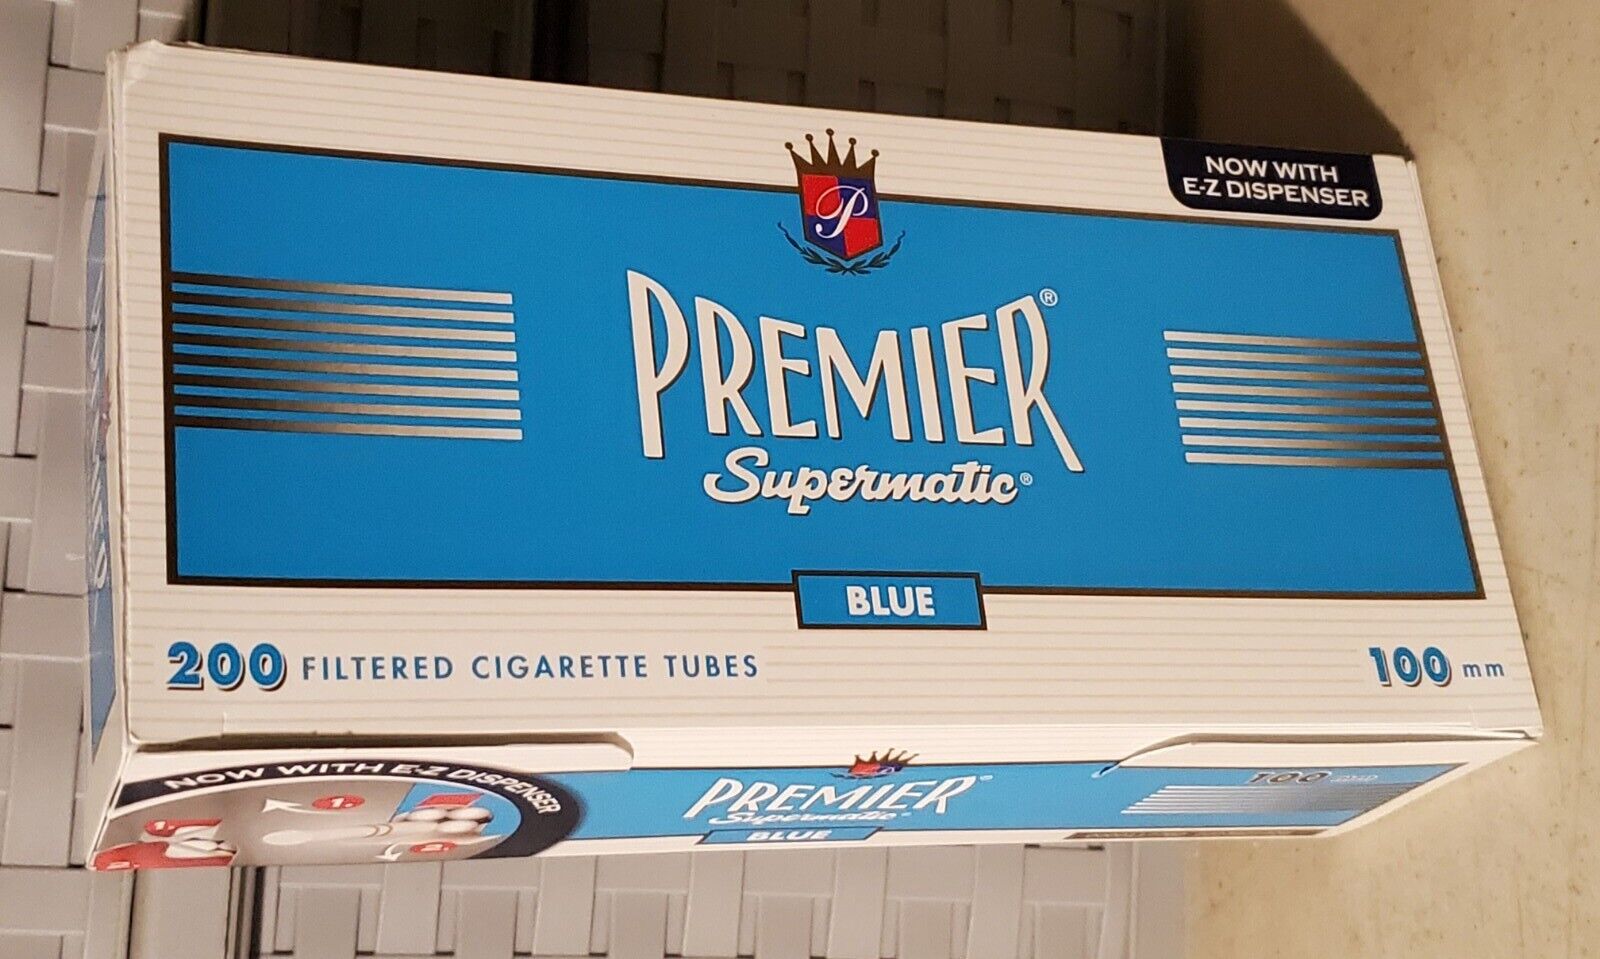 New Very Nice Premier Supermatic 100mm Blue Cigarette Filter Tubes 1 Box Of 200